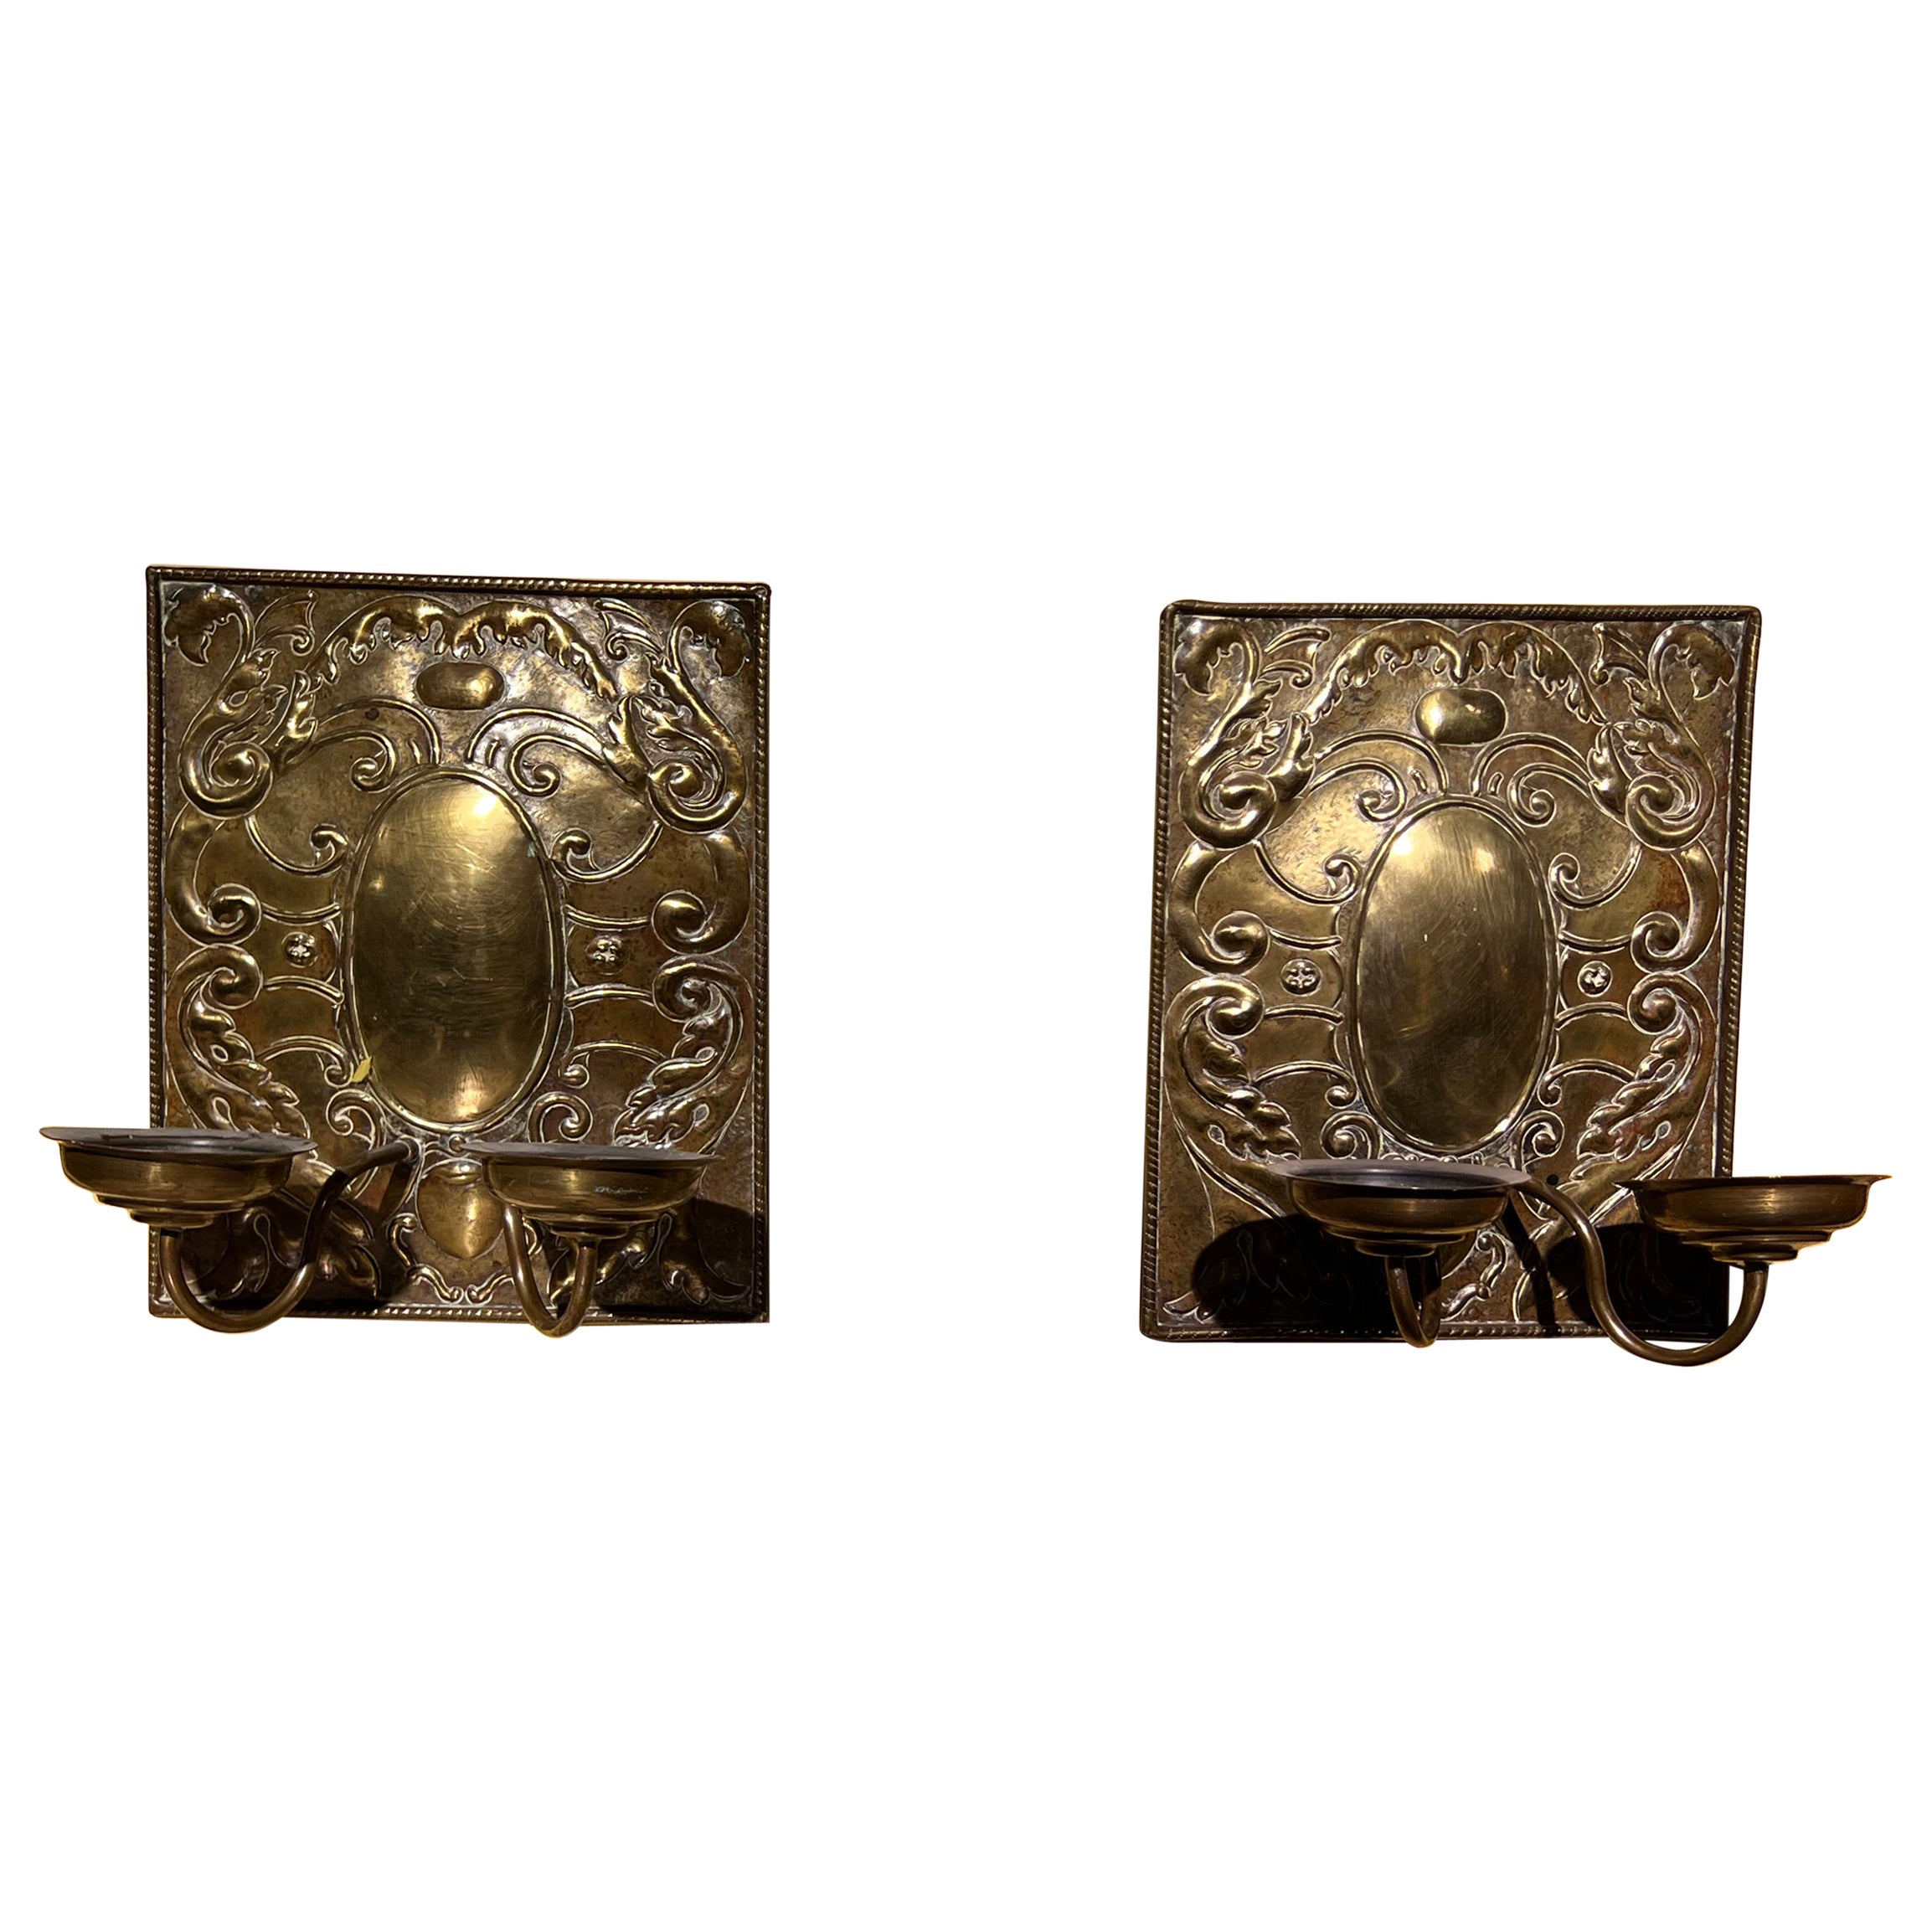 Antique Blaker / Wall Lamp with a Heavy Wall Plaque For Sale